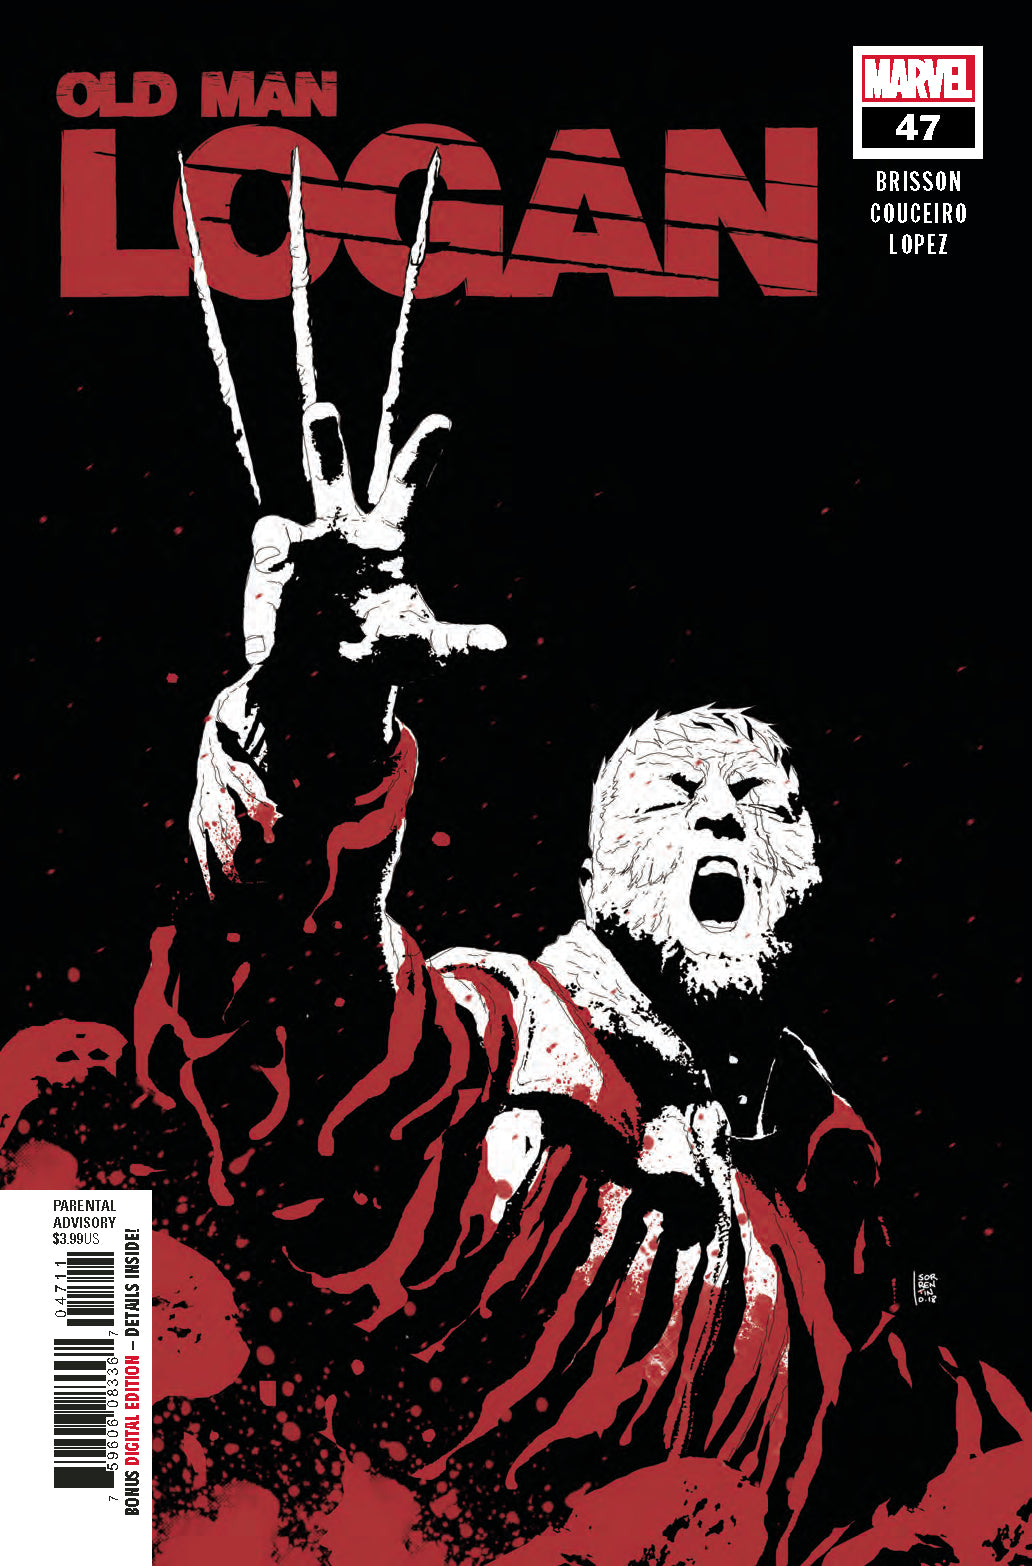 Photo of Old Man Logan Issue 47 comic sold by Stronghold Collectibles